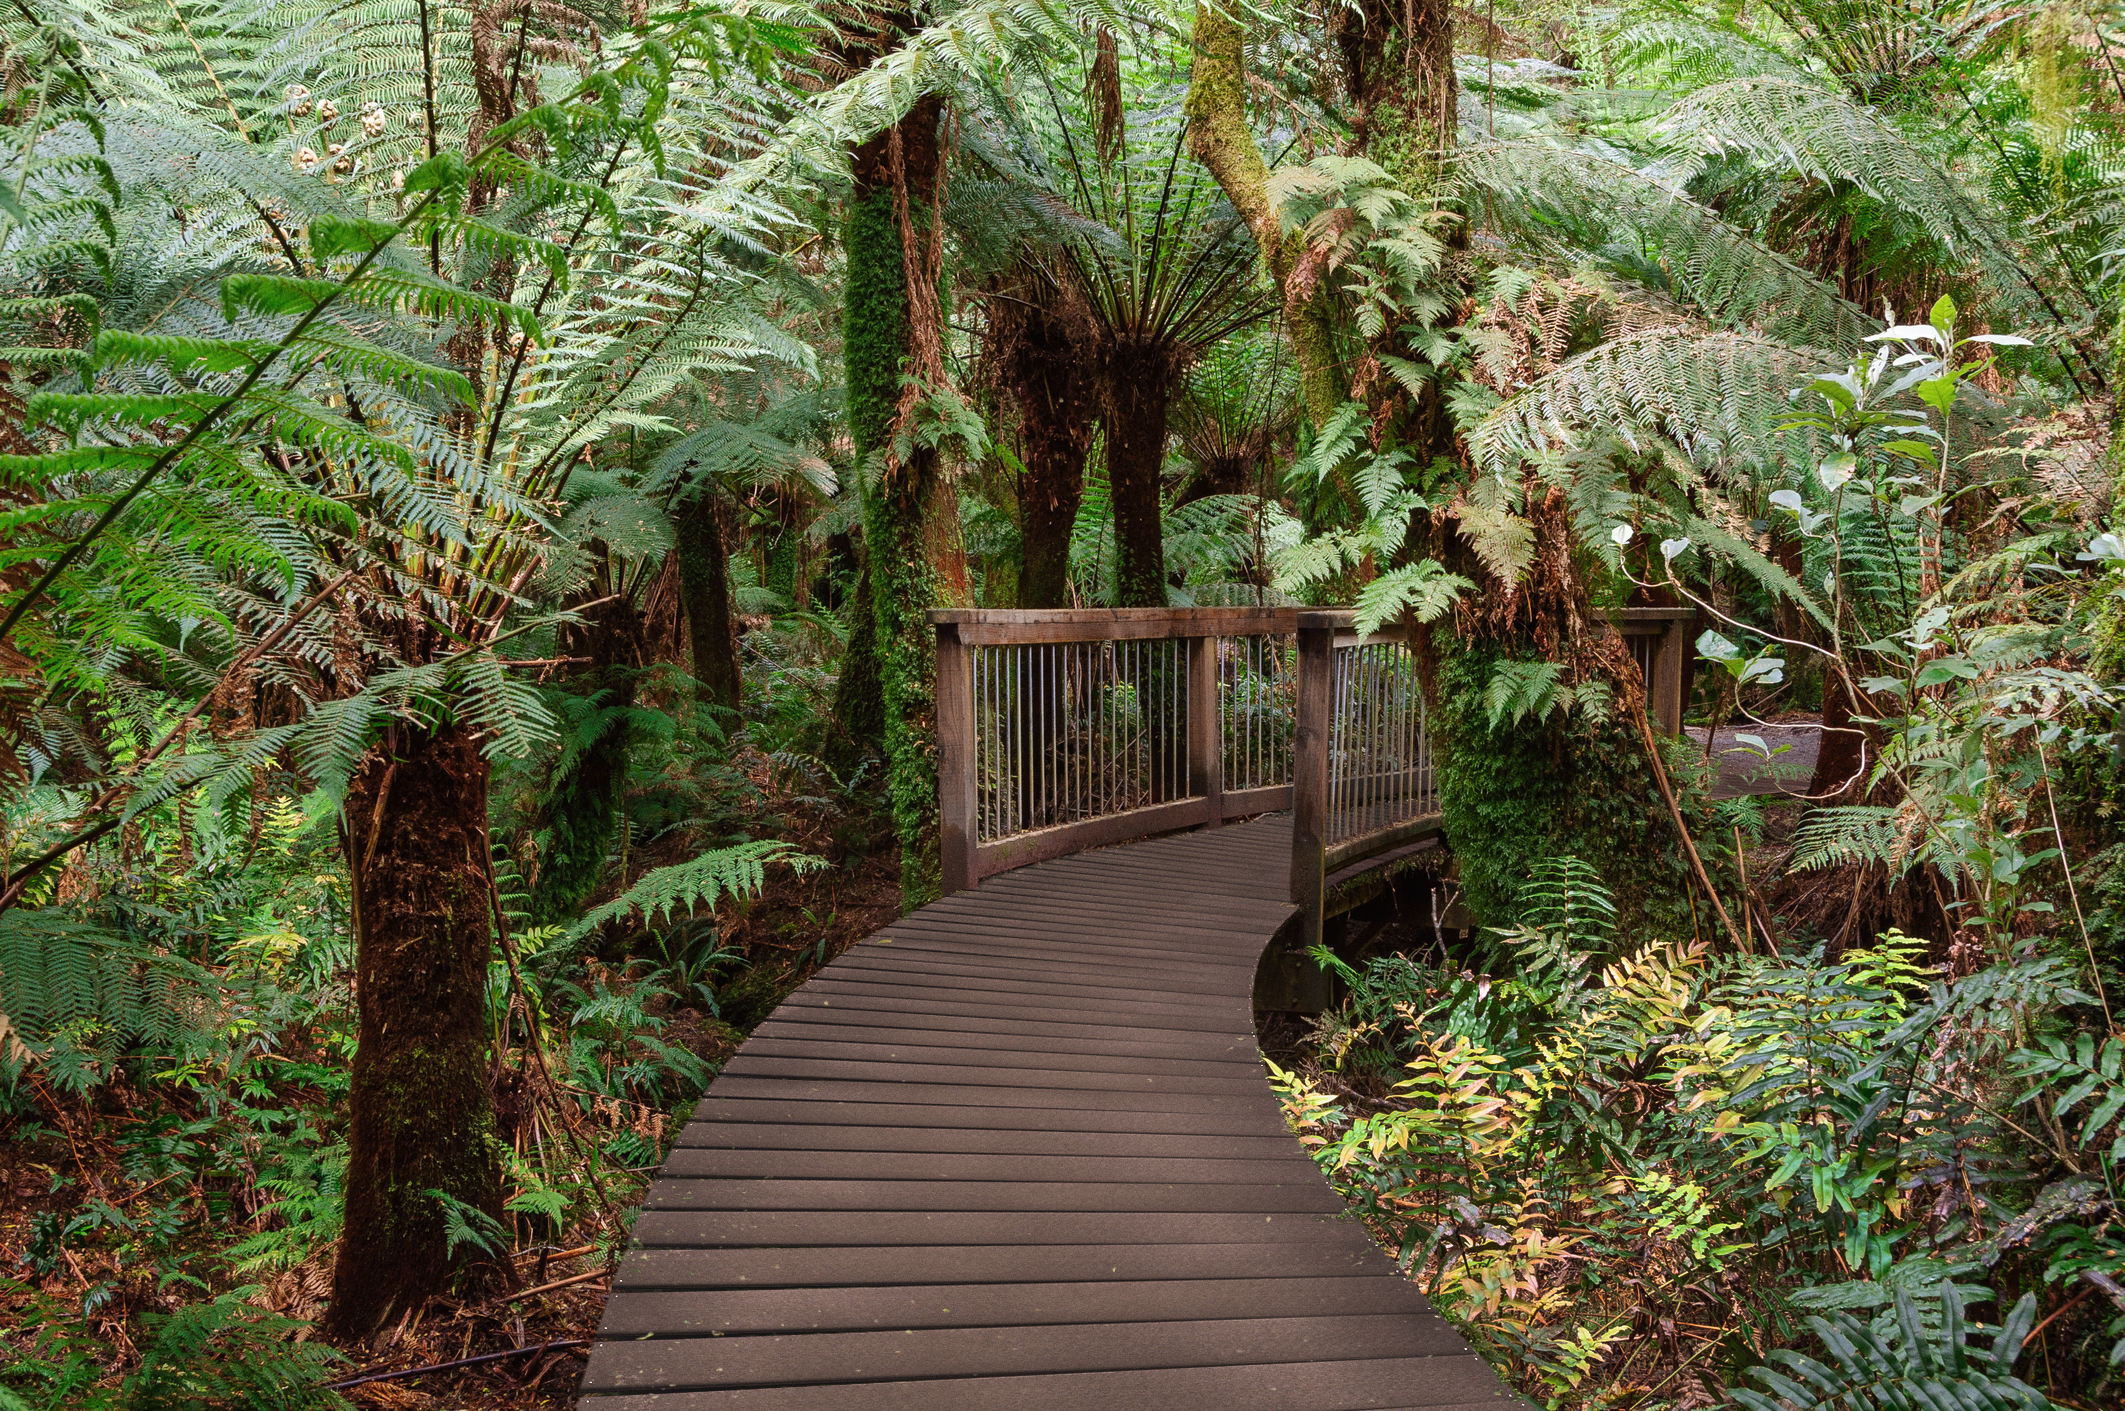 A wooden walkway through a tropical forest.